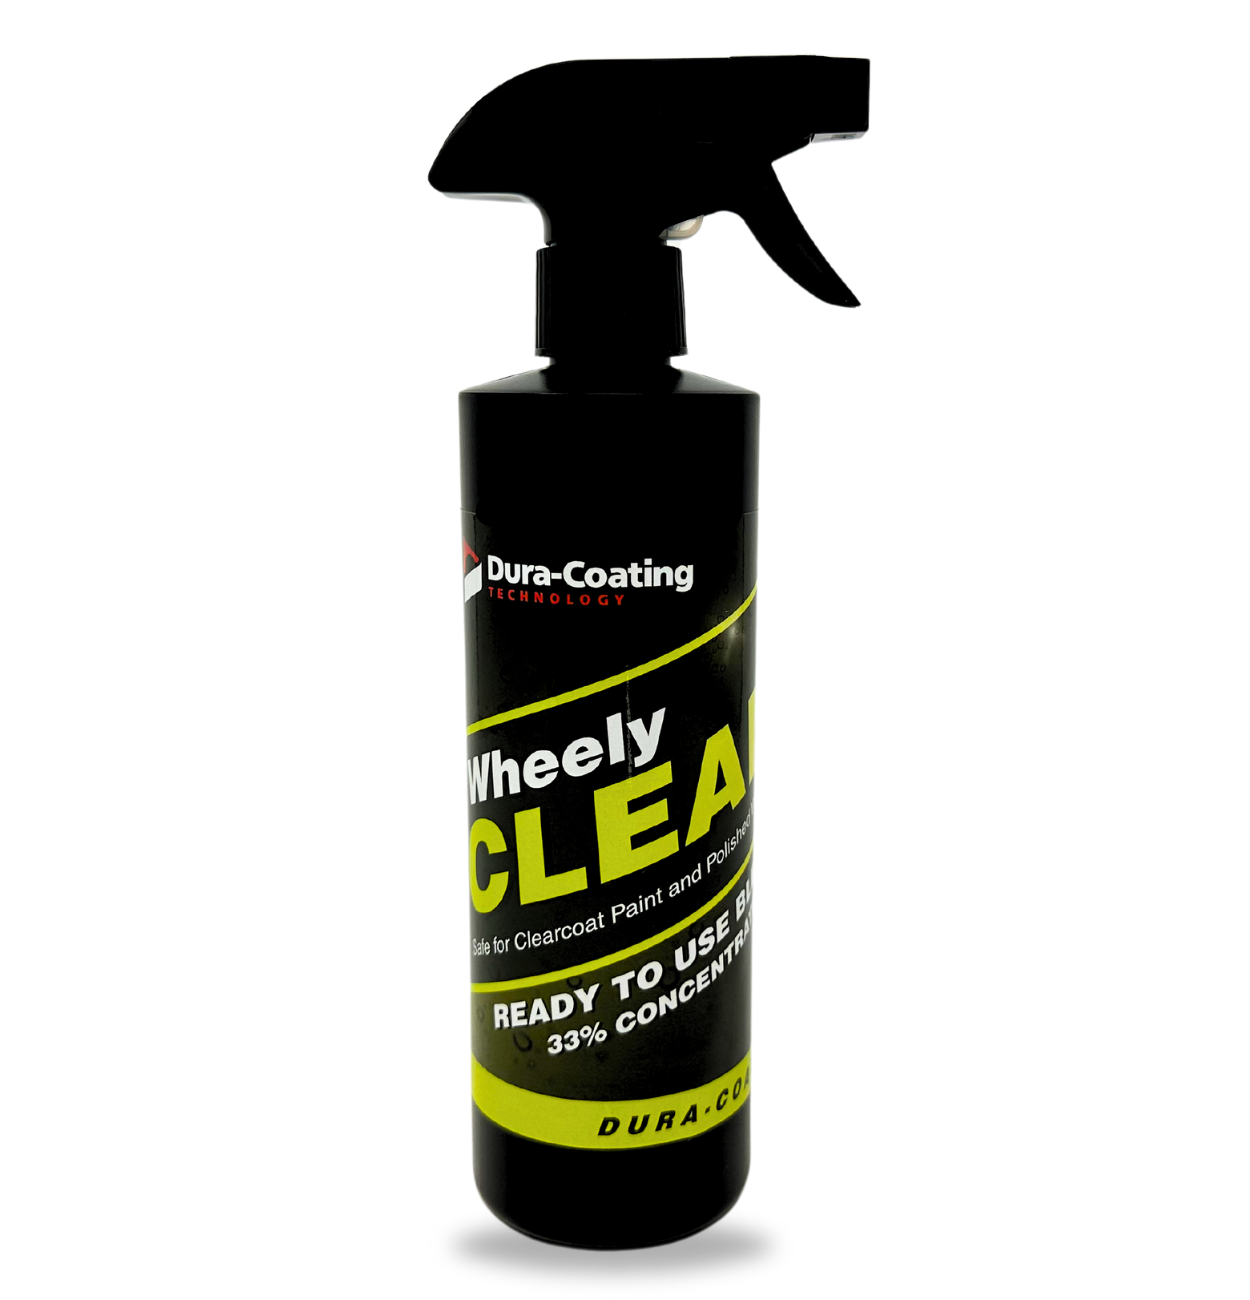 Wheely Clean Professional Wheel Cleaner